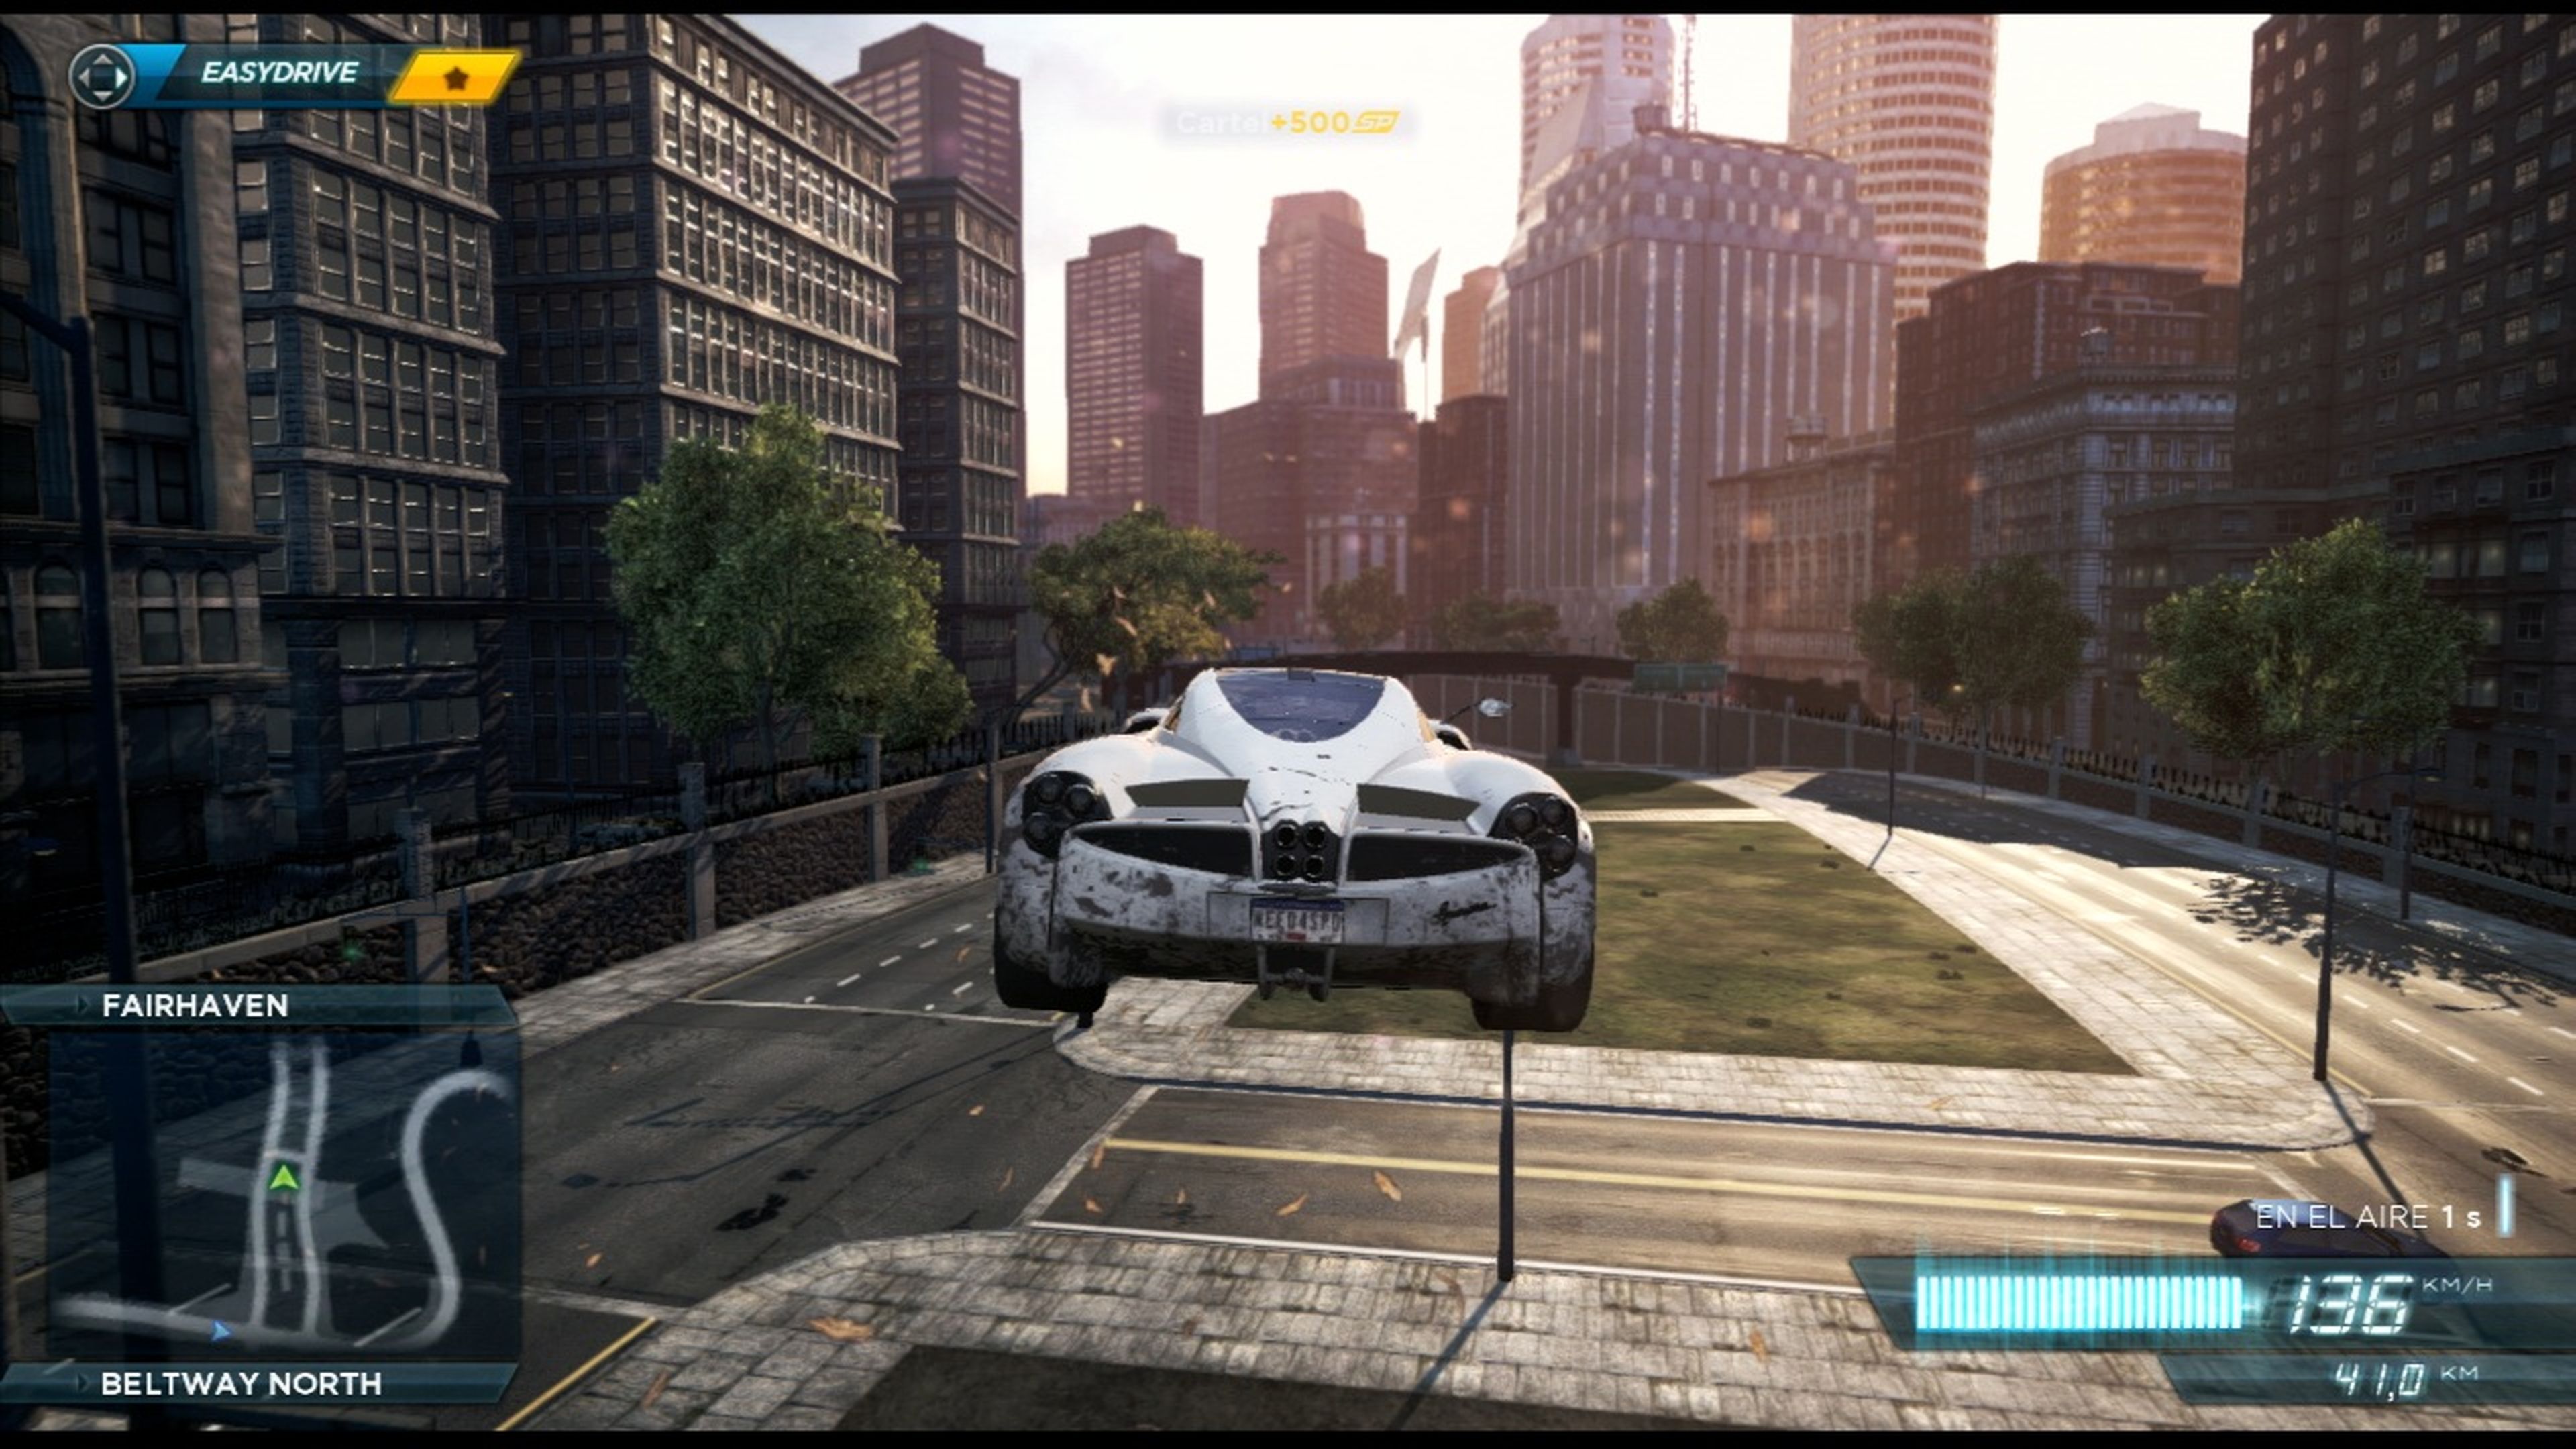 Análisis de Need for Speed Most Wanted